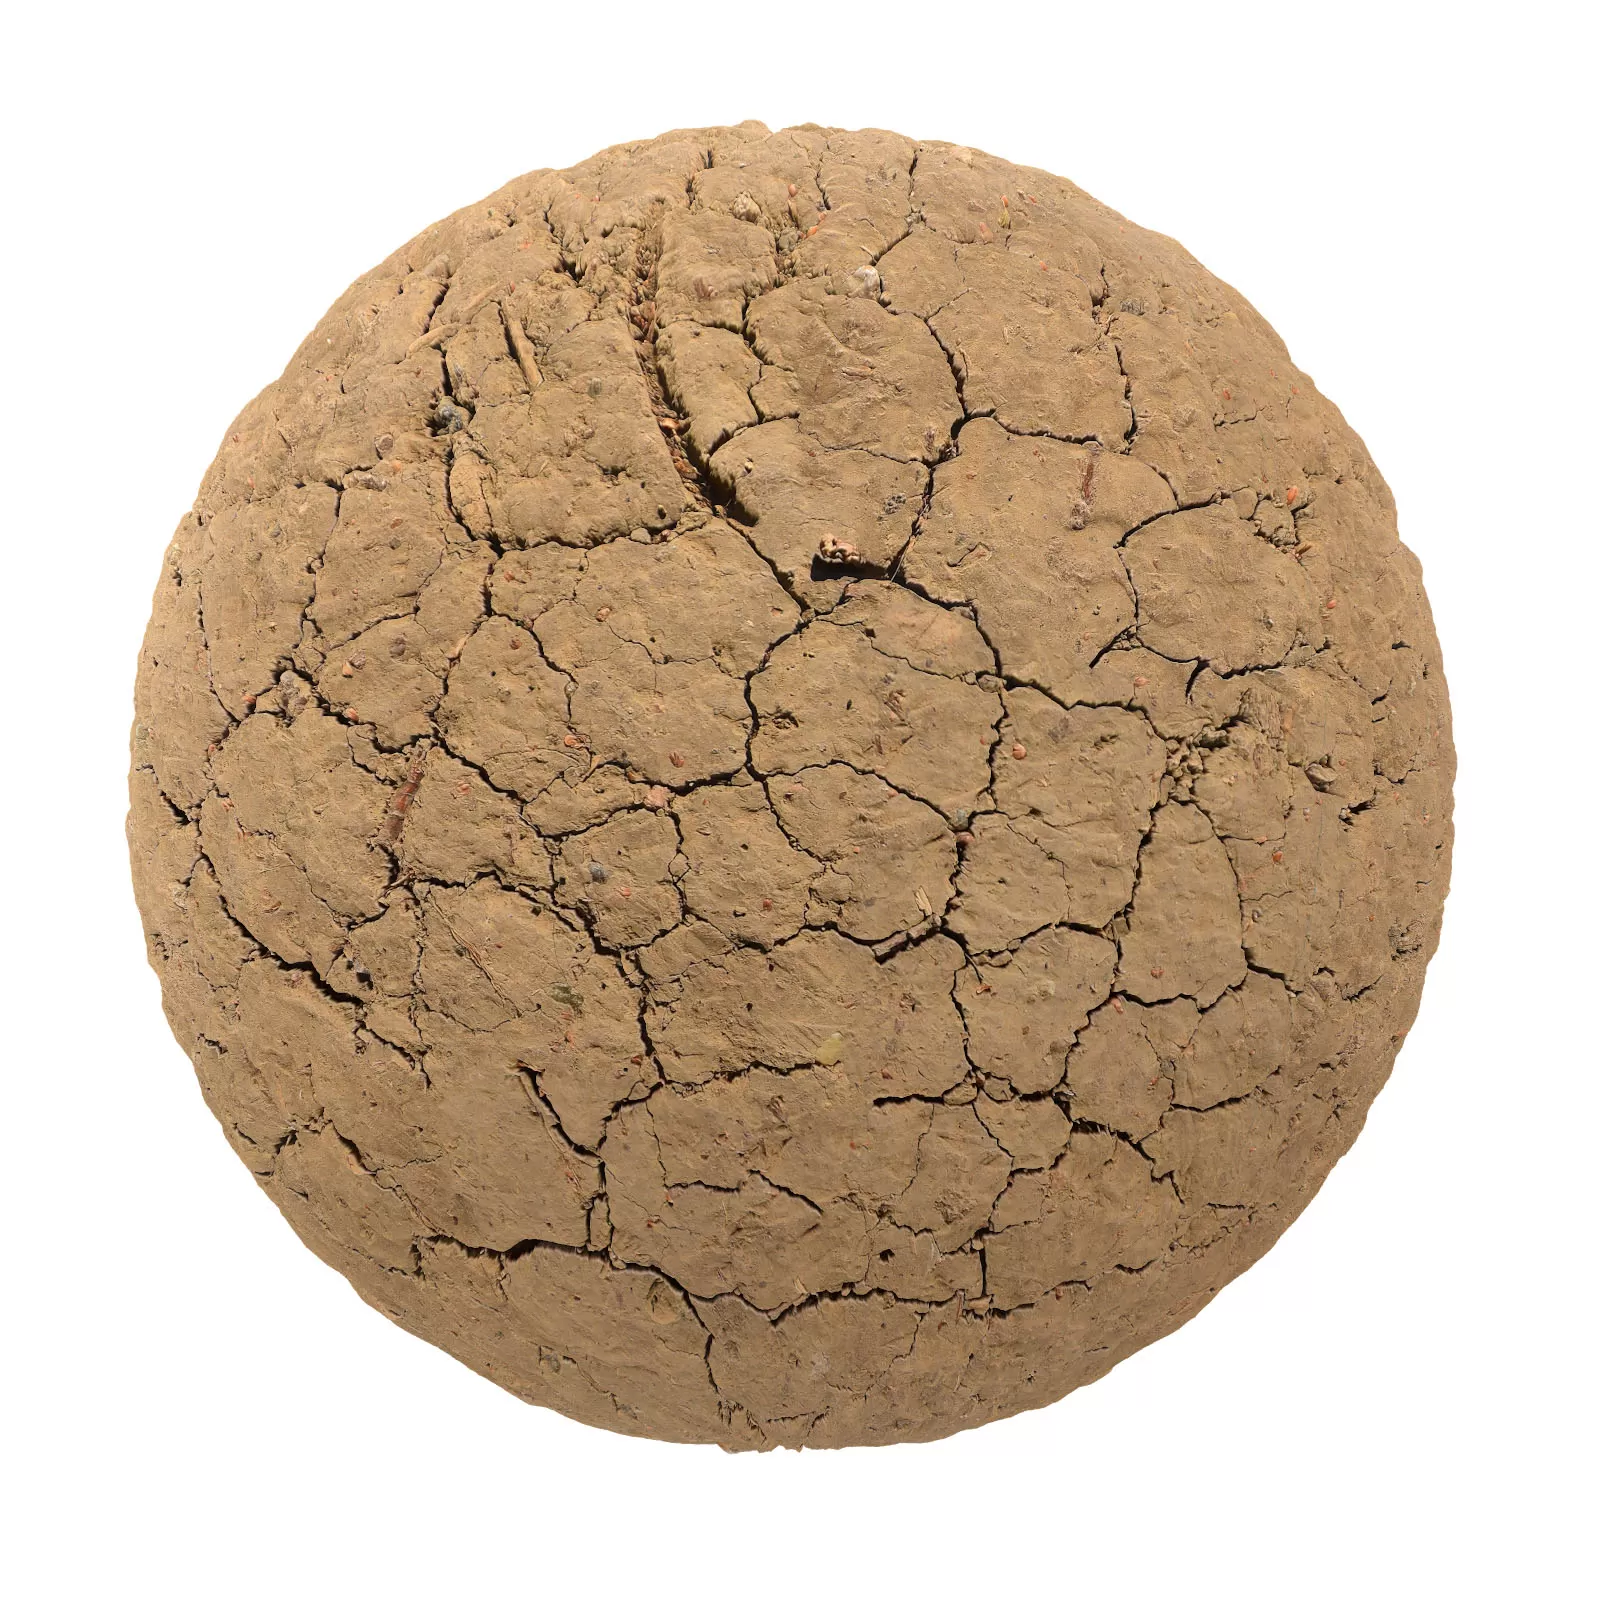 PBR CGAXIS TEXTURES – SOIL – Dry Cracked Dirt 6